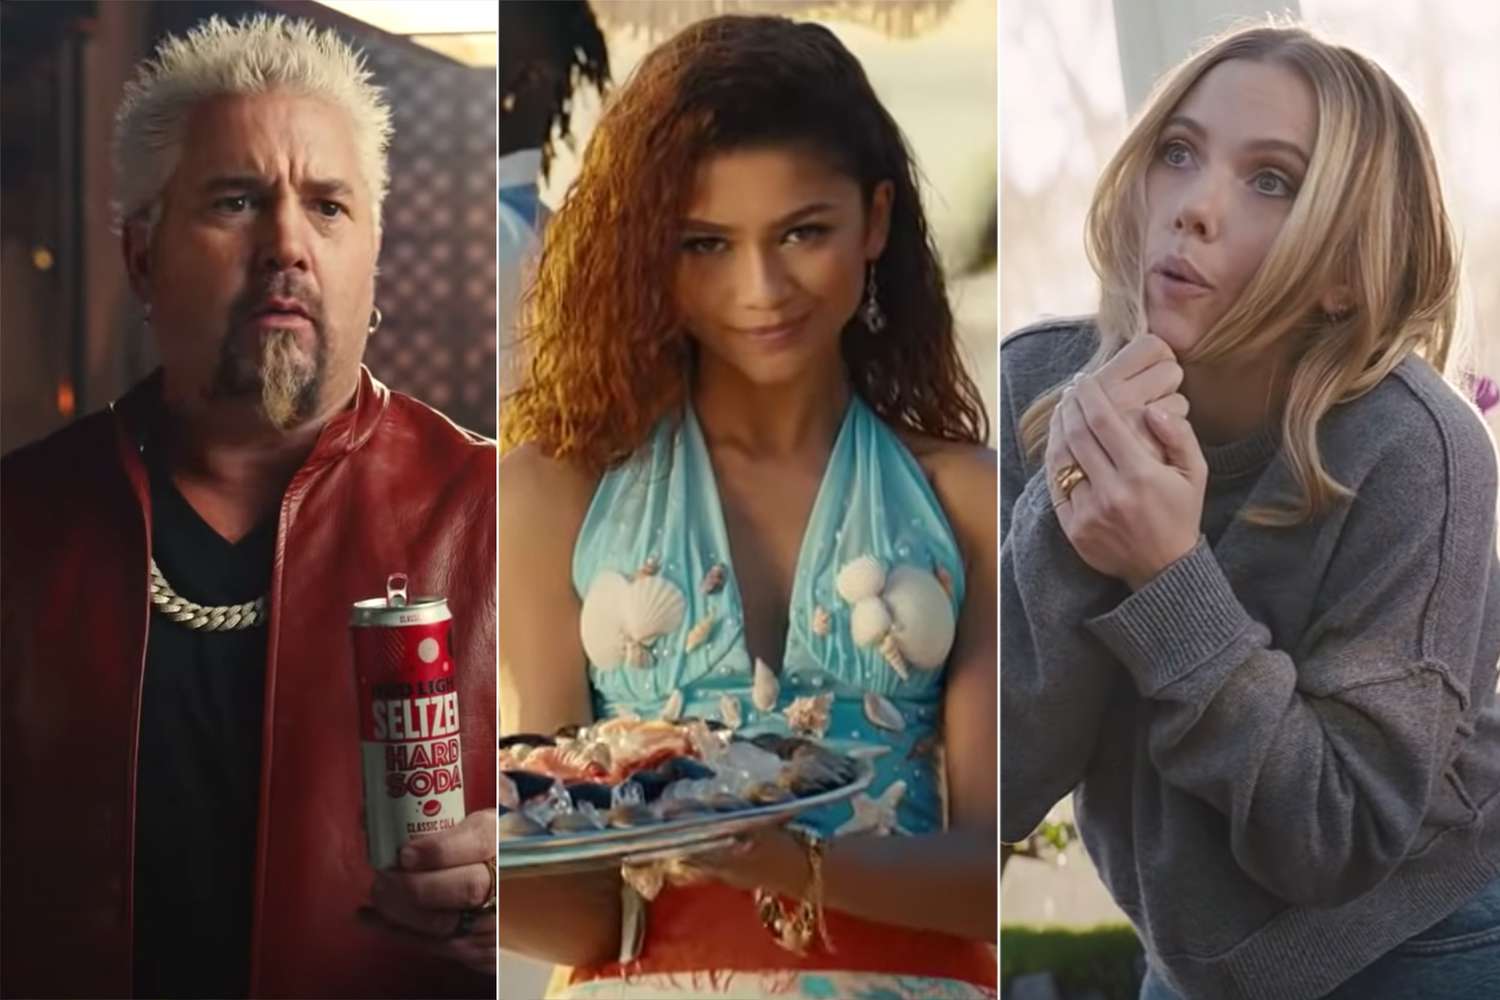 Watch every star-studded 2022 Super Bowl commercial.